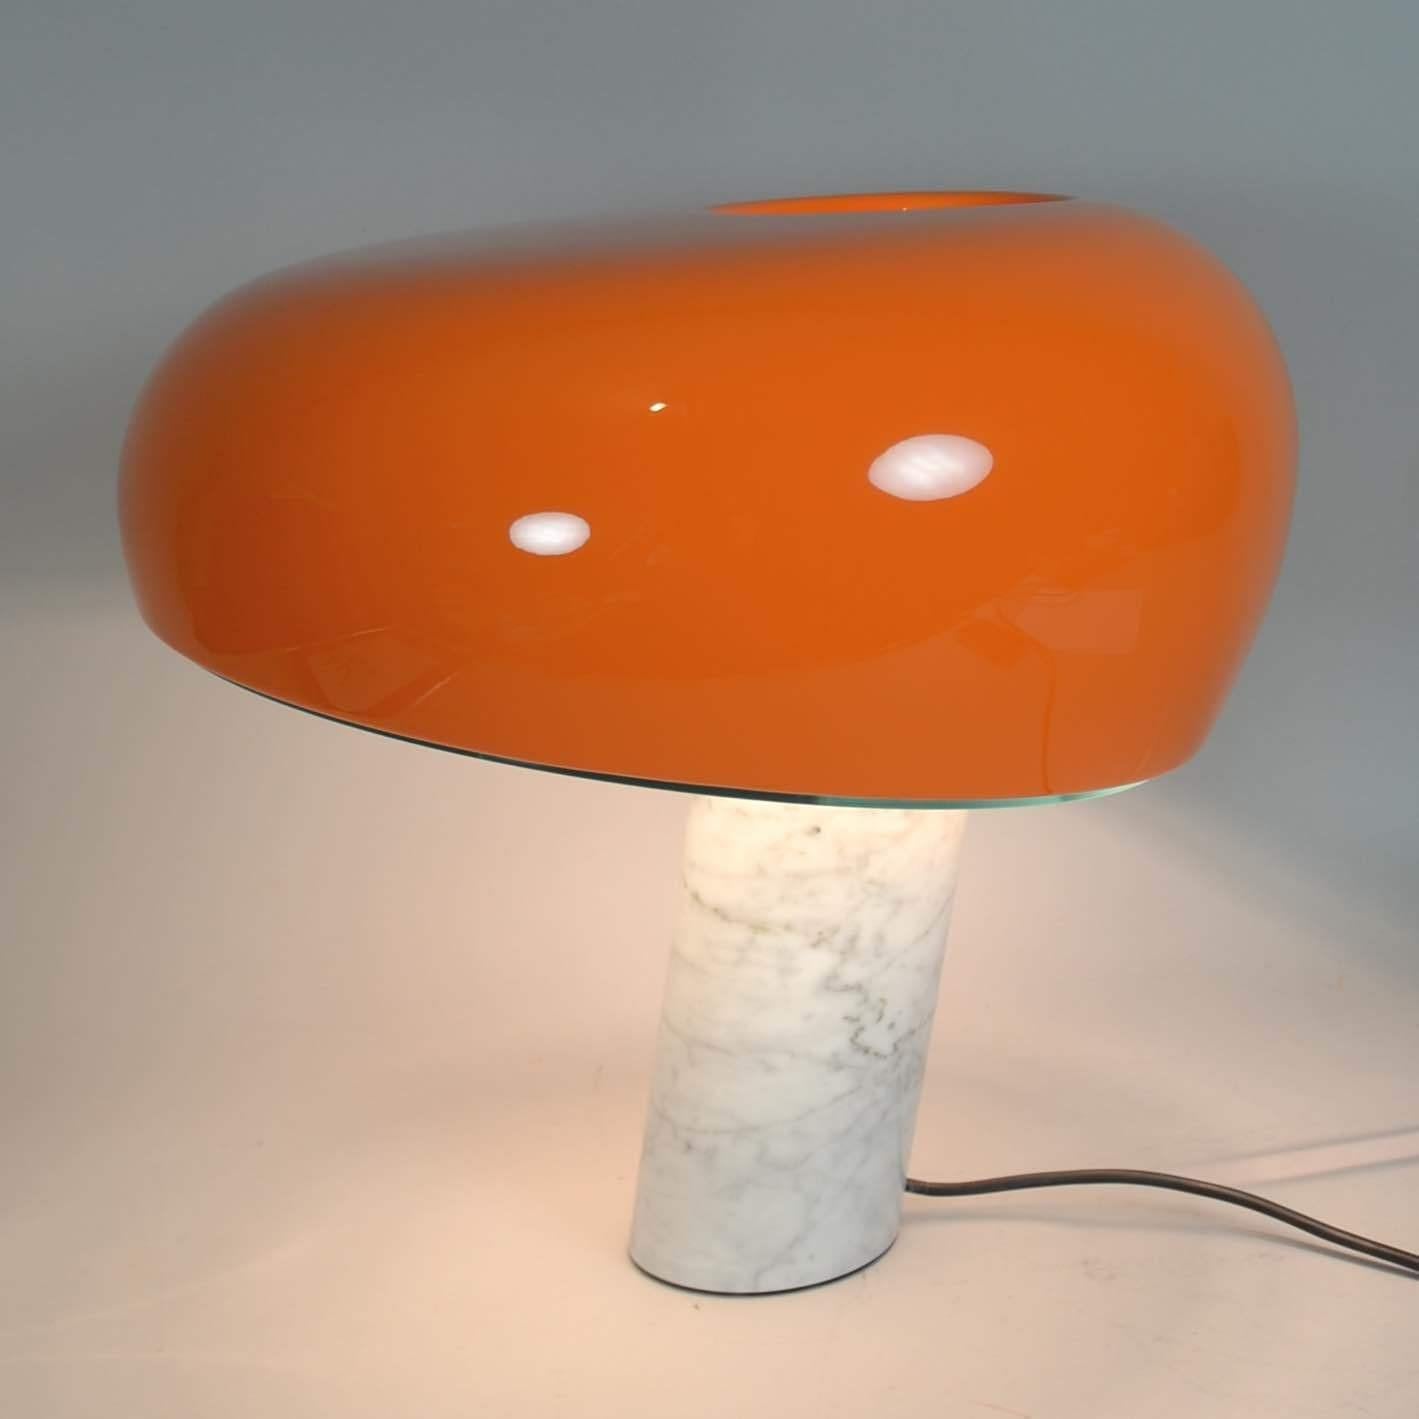 Achille & Pier Giacomo Castiglioni Snoopy table lamp. Dimmer operated lamp from 1967, with marble base and enameled metal shade. Up to 150 watts E27 socket.

This design from 1967 takes its light-hearted shape and name from the beloved cartoon